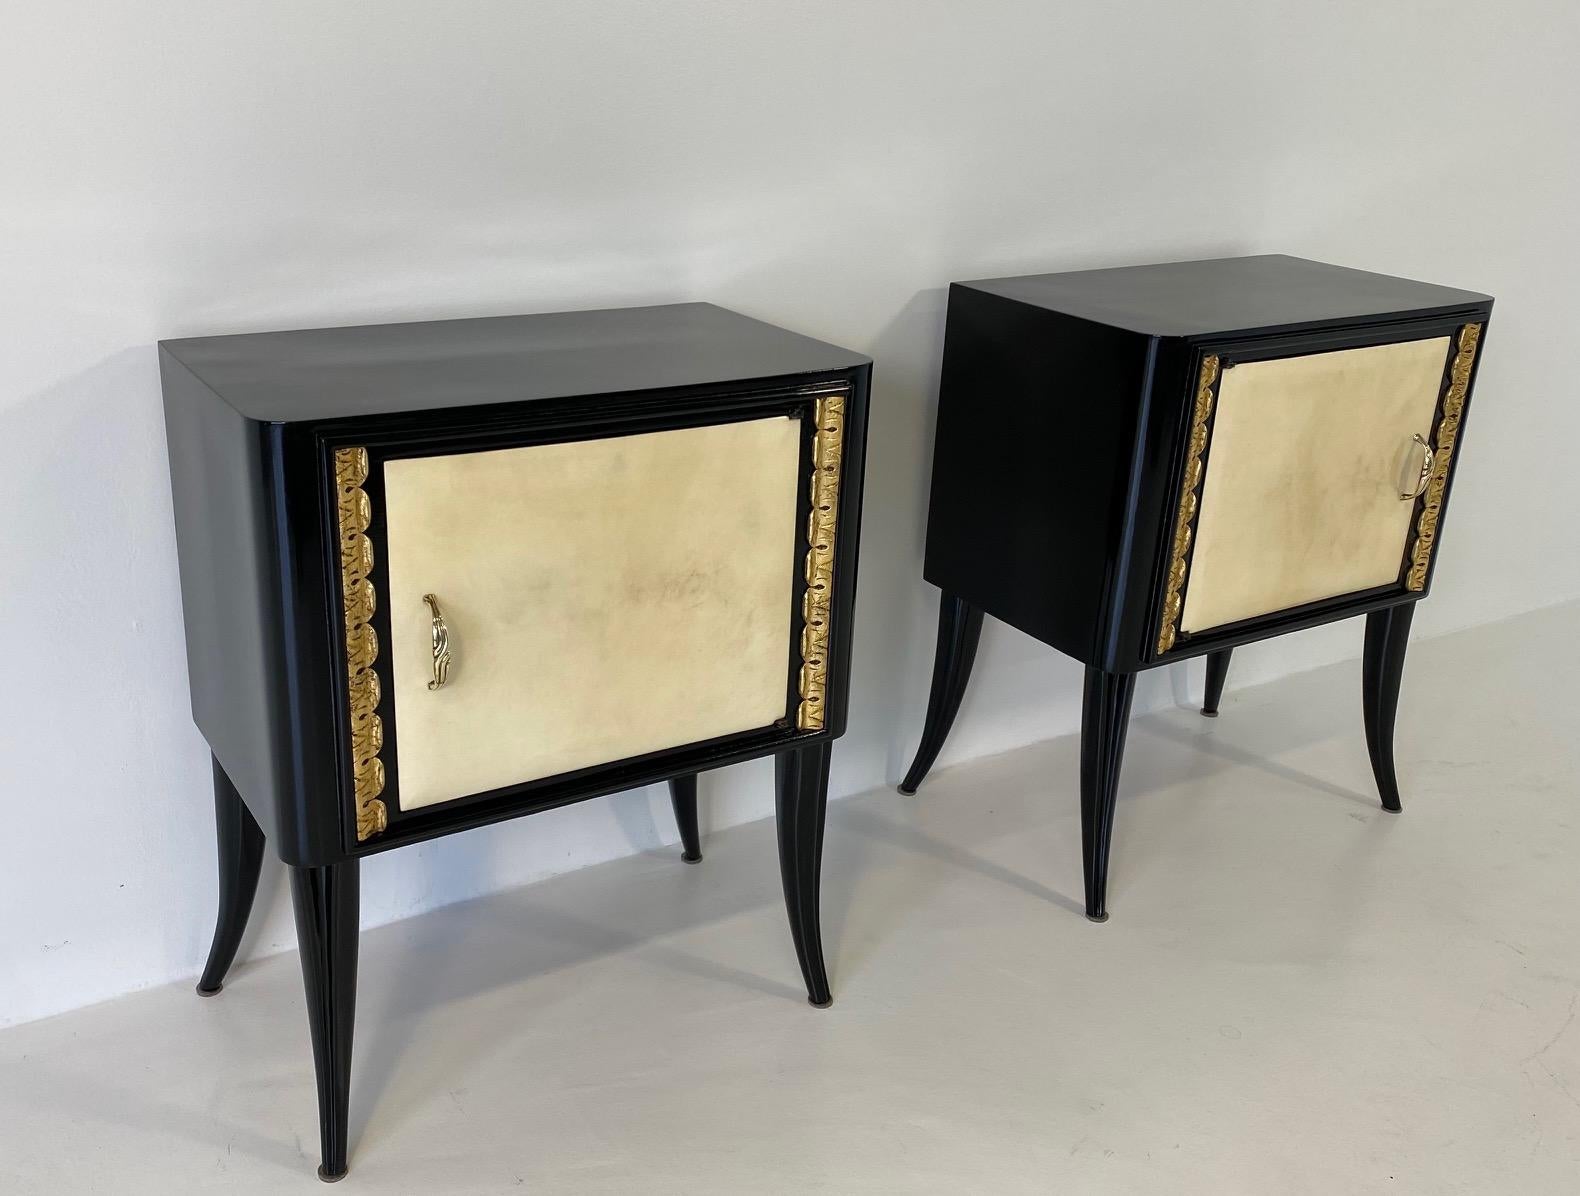 Mid-20th Century Italian Art Deco Parchment, Black Lacquer and Gold Leaf Nightstands, 1940s